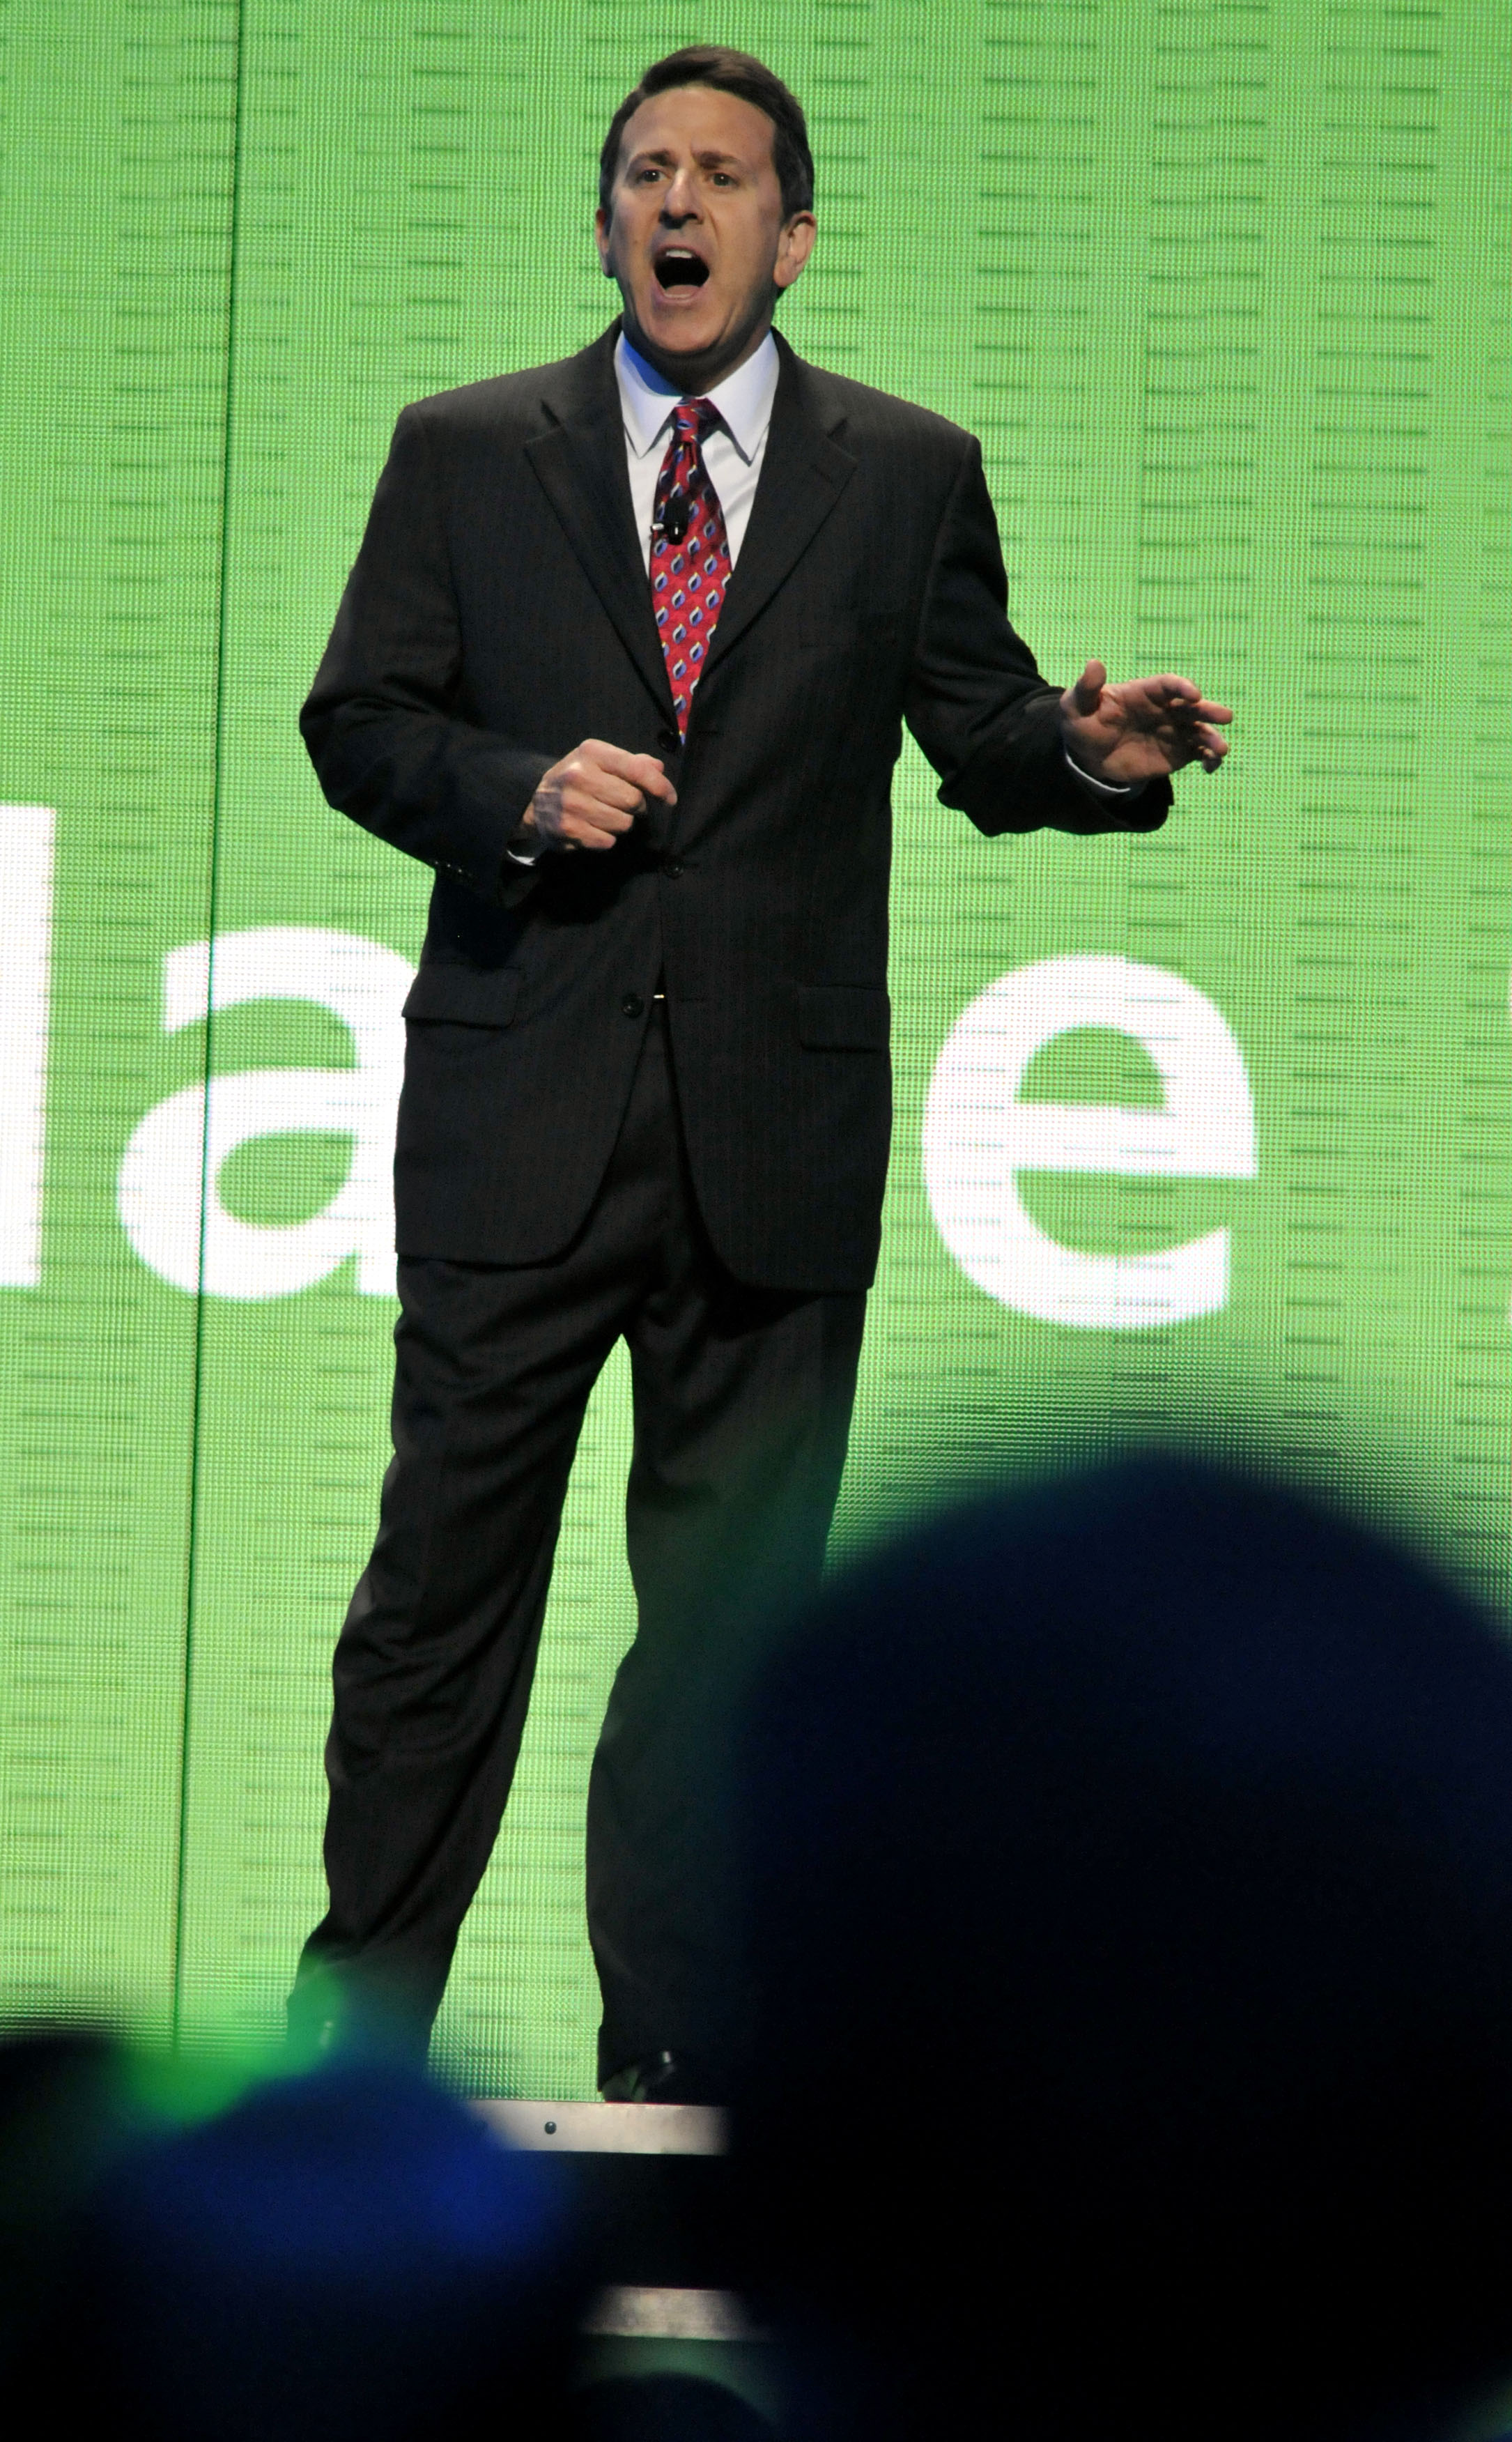 Brian Cornell, then president and CEO of Sam's Club, speaks during the Wal-Mart Stores Inc. shareholders' meeting in Fayetteville, Ark., in this June 4, 2010 file photo.